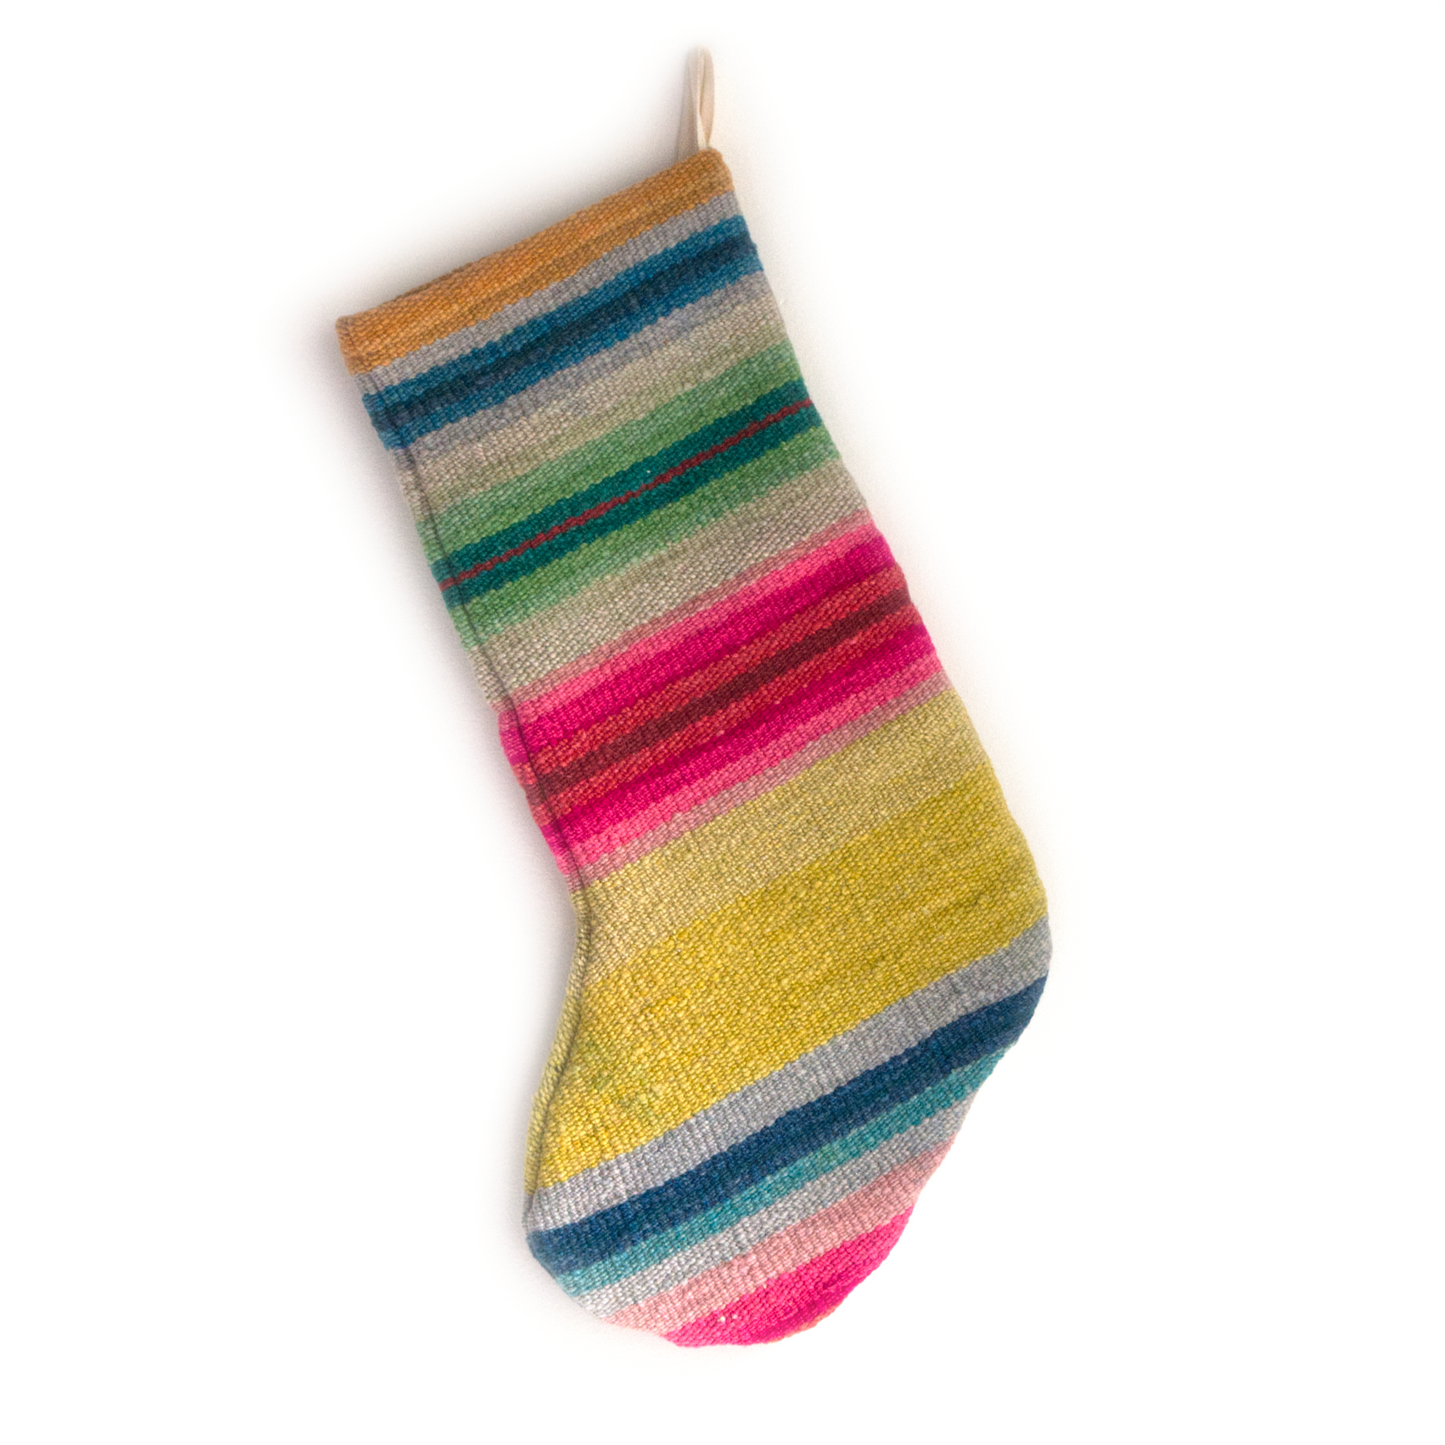 Intiearth_Peruvian_Frazada_Christmas_Stocking_no_11_multicolor_bright_and_colorful_one_of_a_kind.png